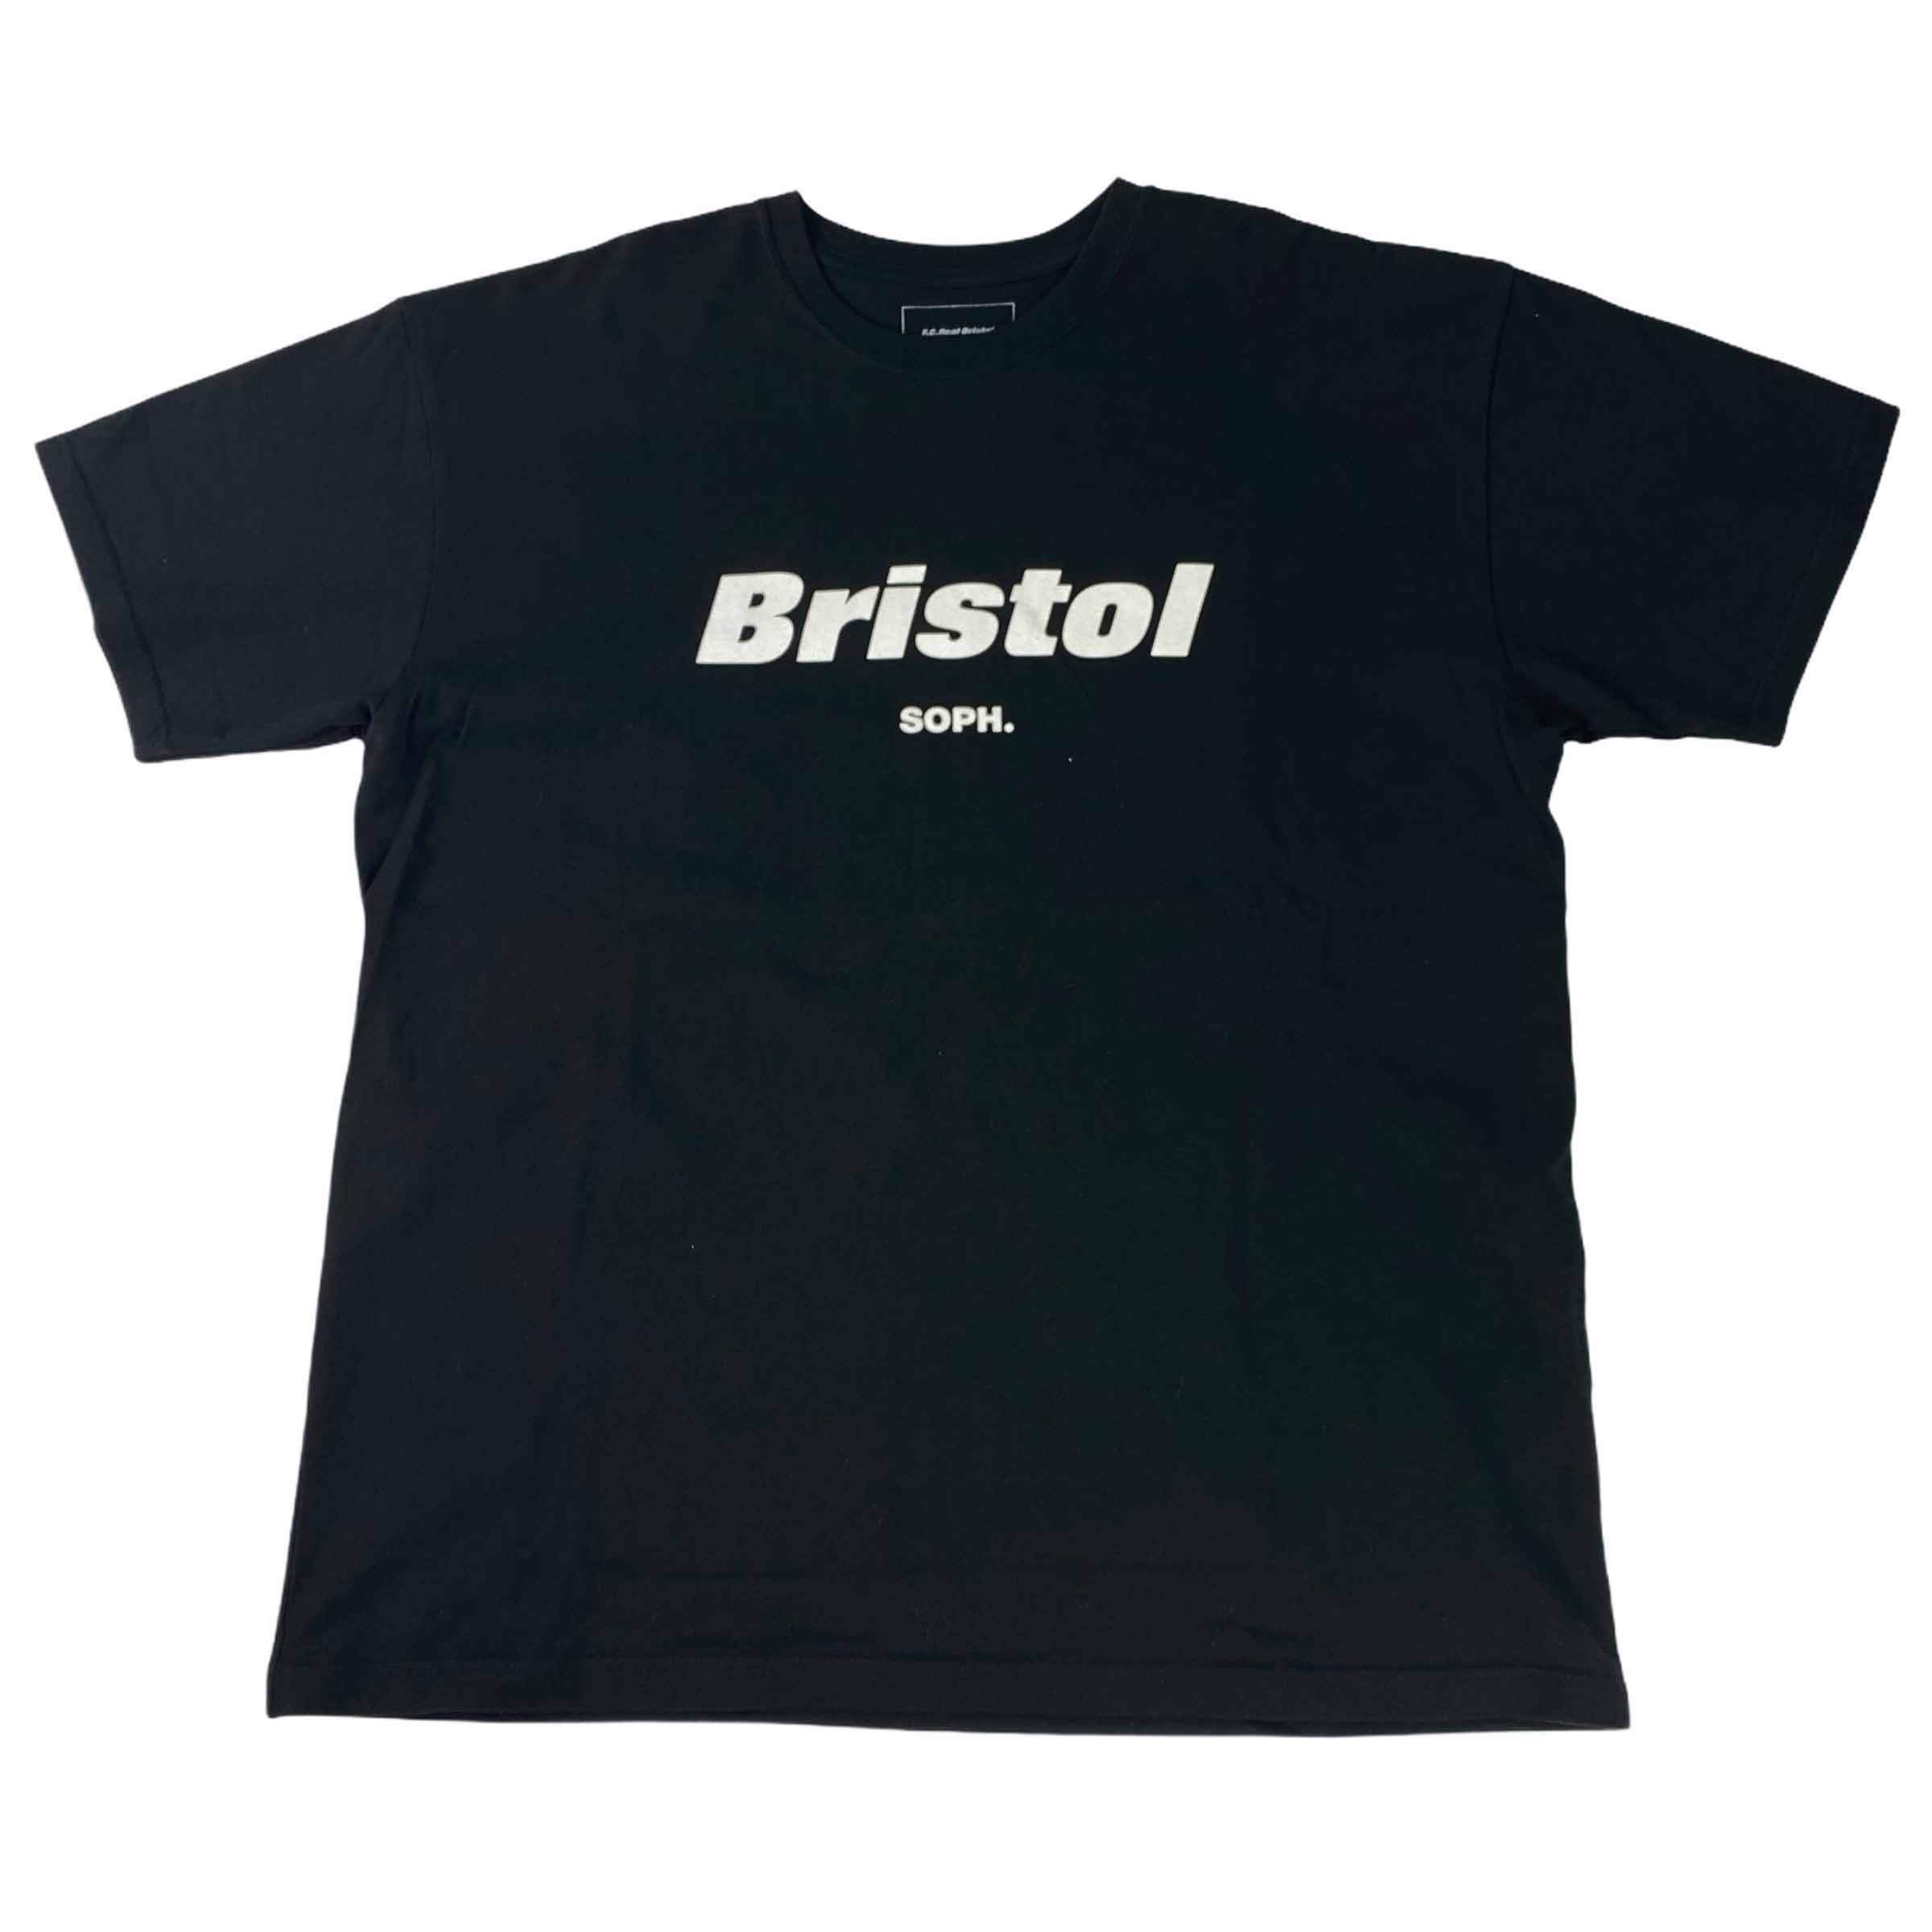 [Fc Real Bristol X Soph] Authentic Tee - Size XL